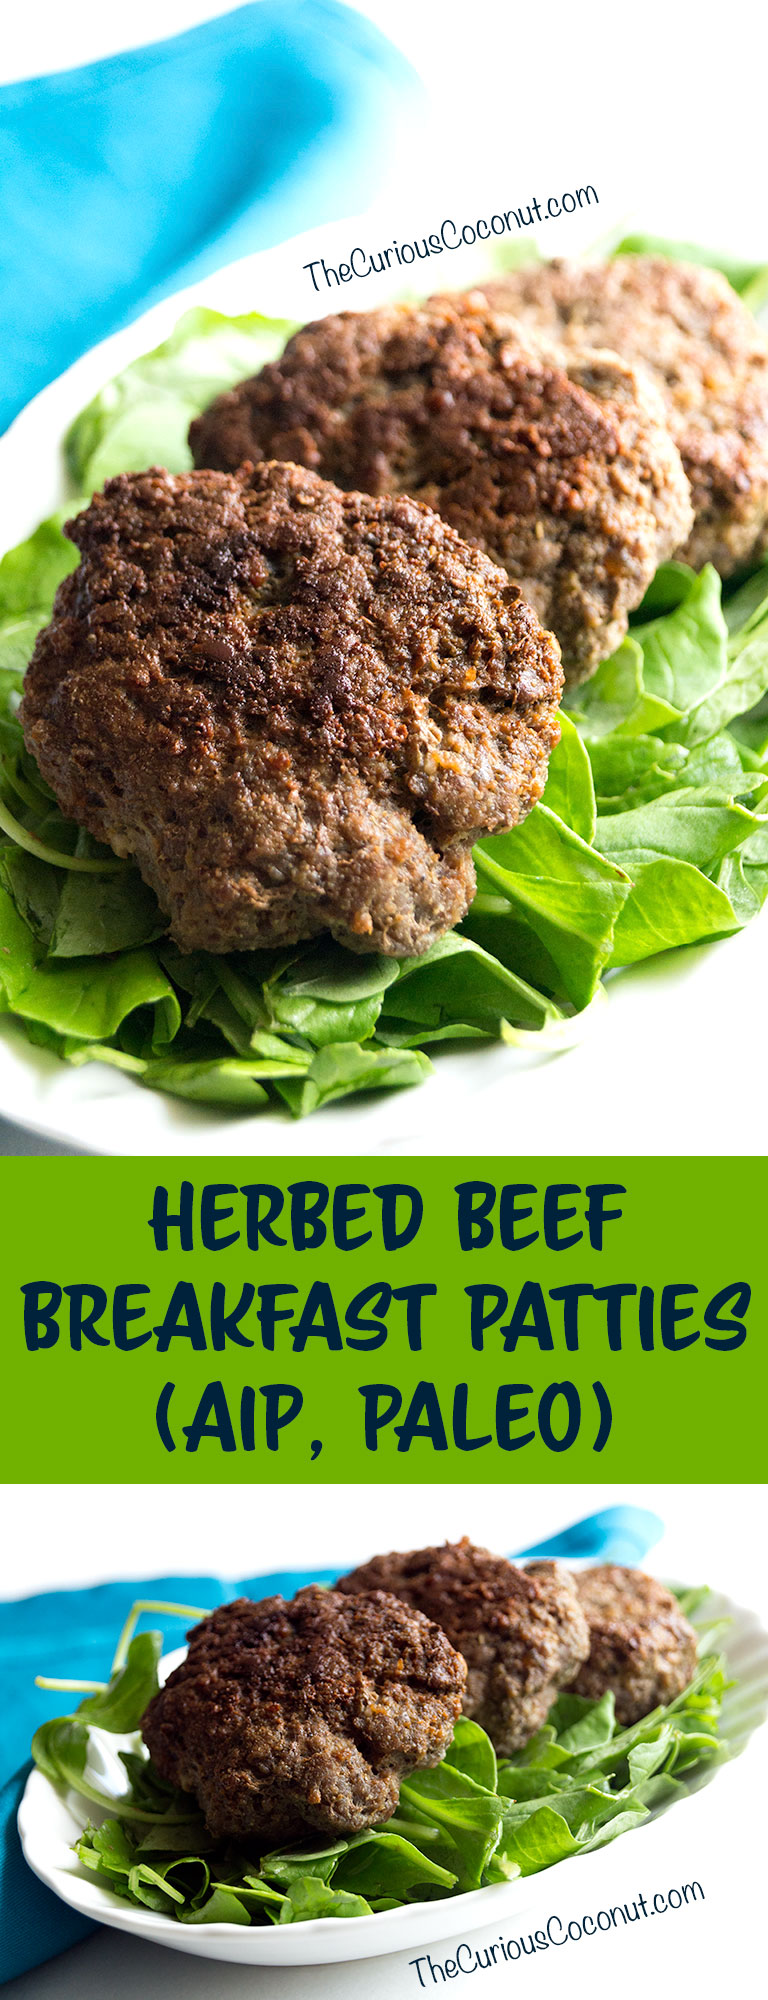 AIP Herbed Beef Breakfast Patties for the Paleo autoimmmune protocol  // TheCuriousCoconut.com